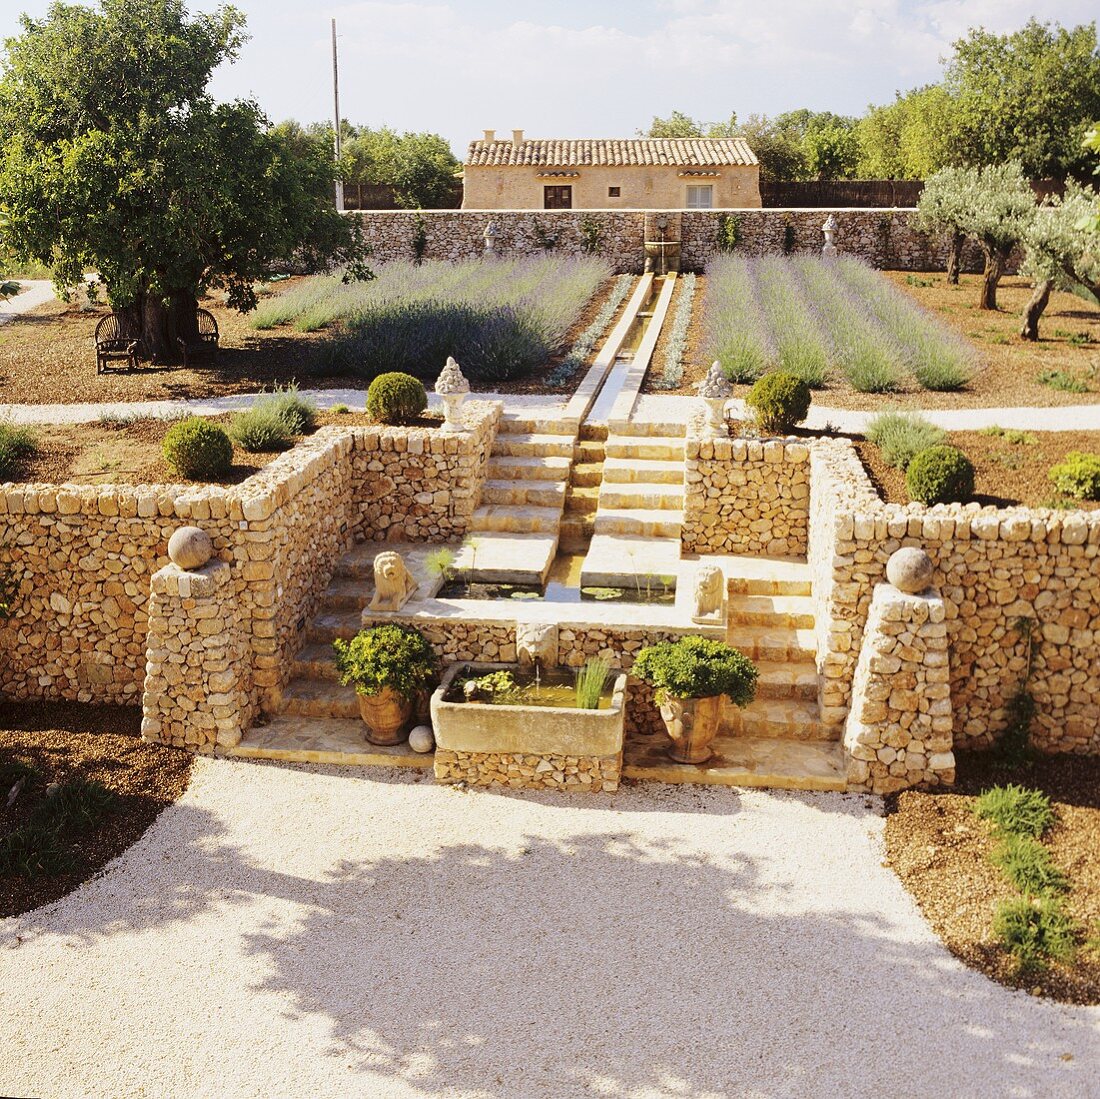 A flight of steps with natural stone wall in a Mediterranean terrace garden